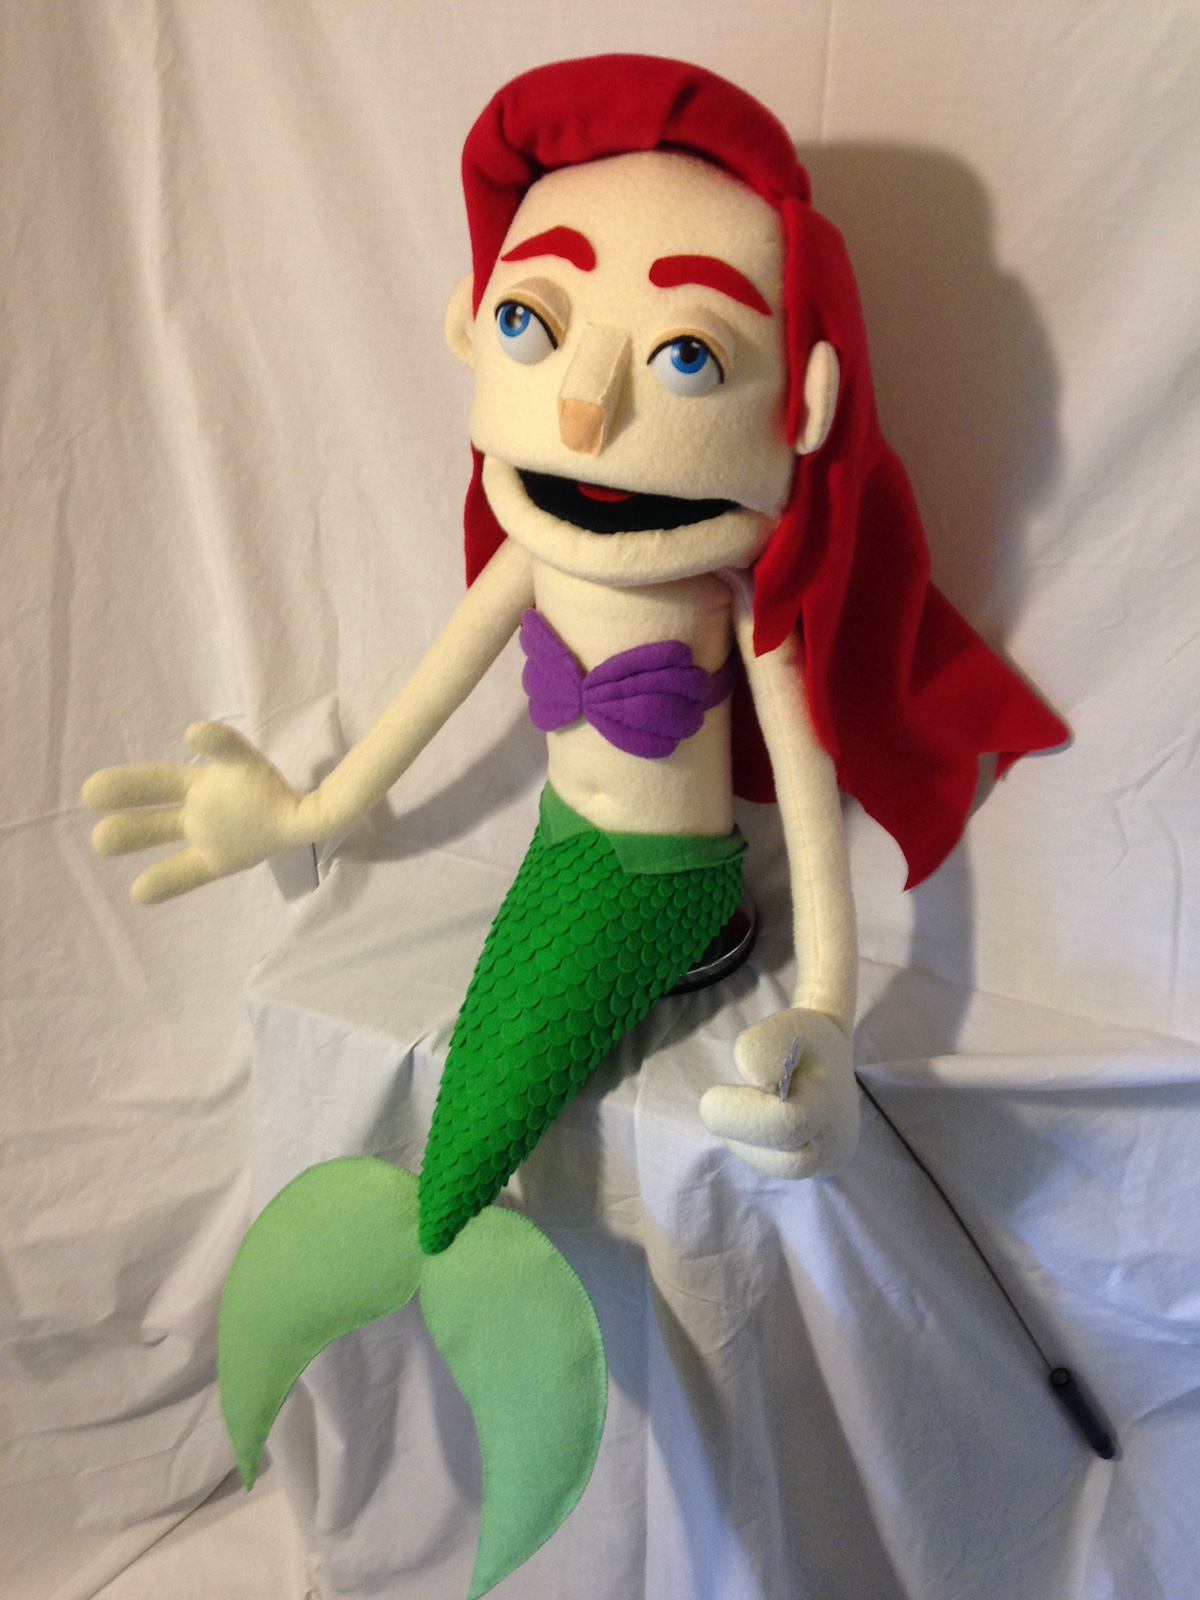 mermaid puppet hand and rod redhead